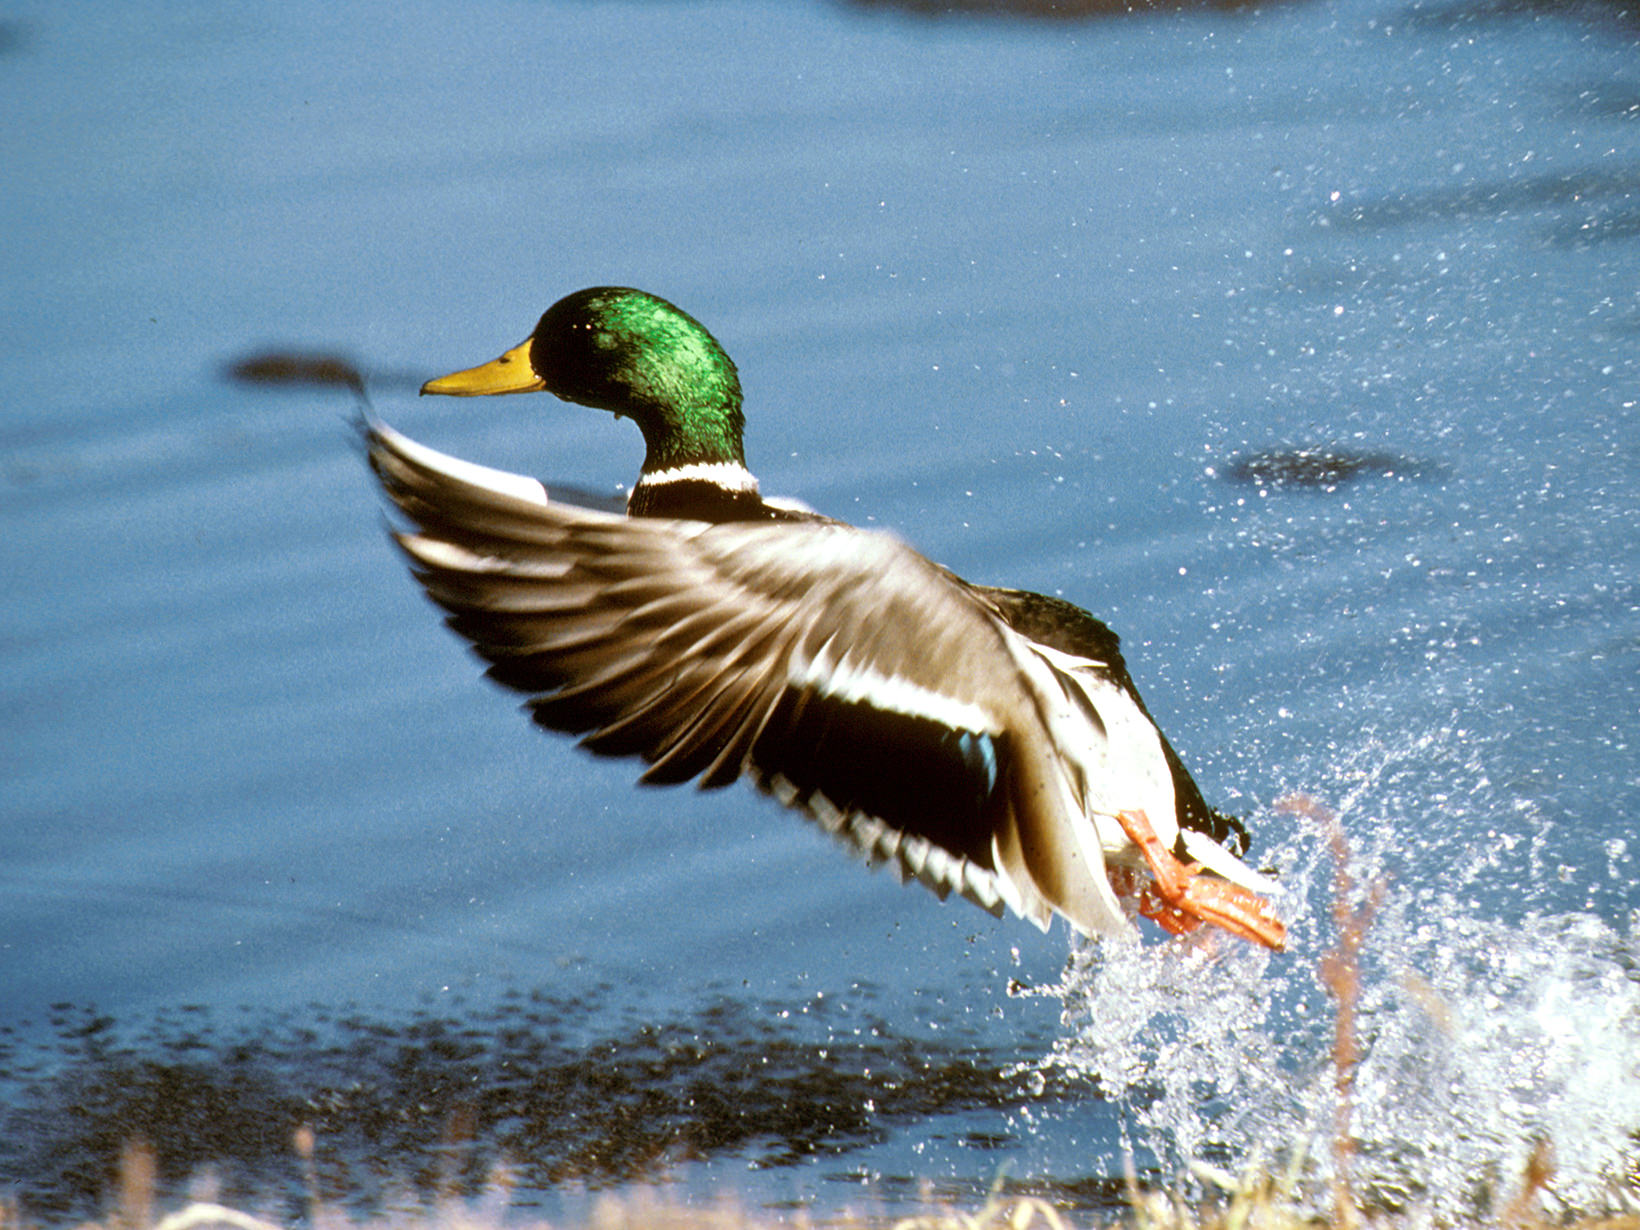 Mallard Drake duck flying out of water